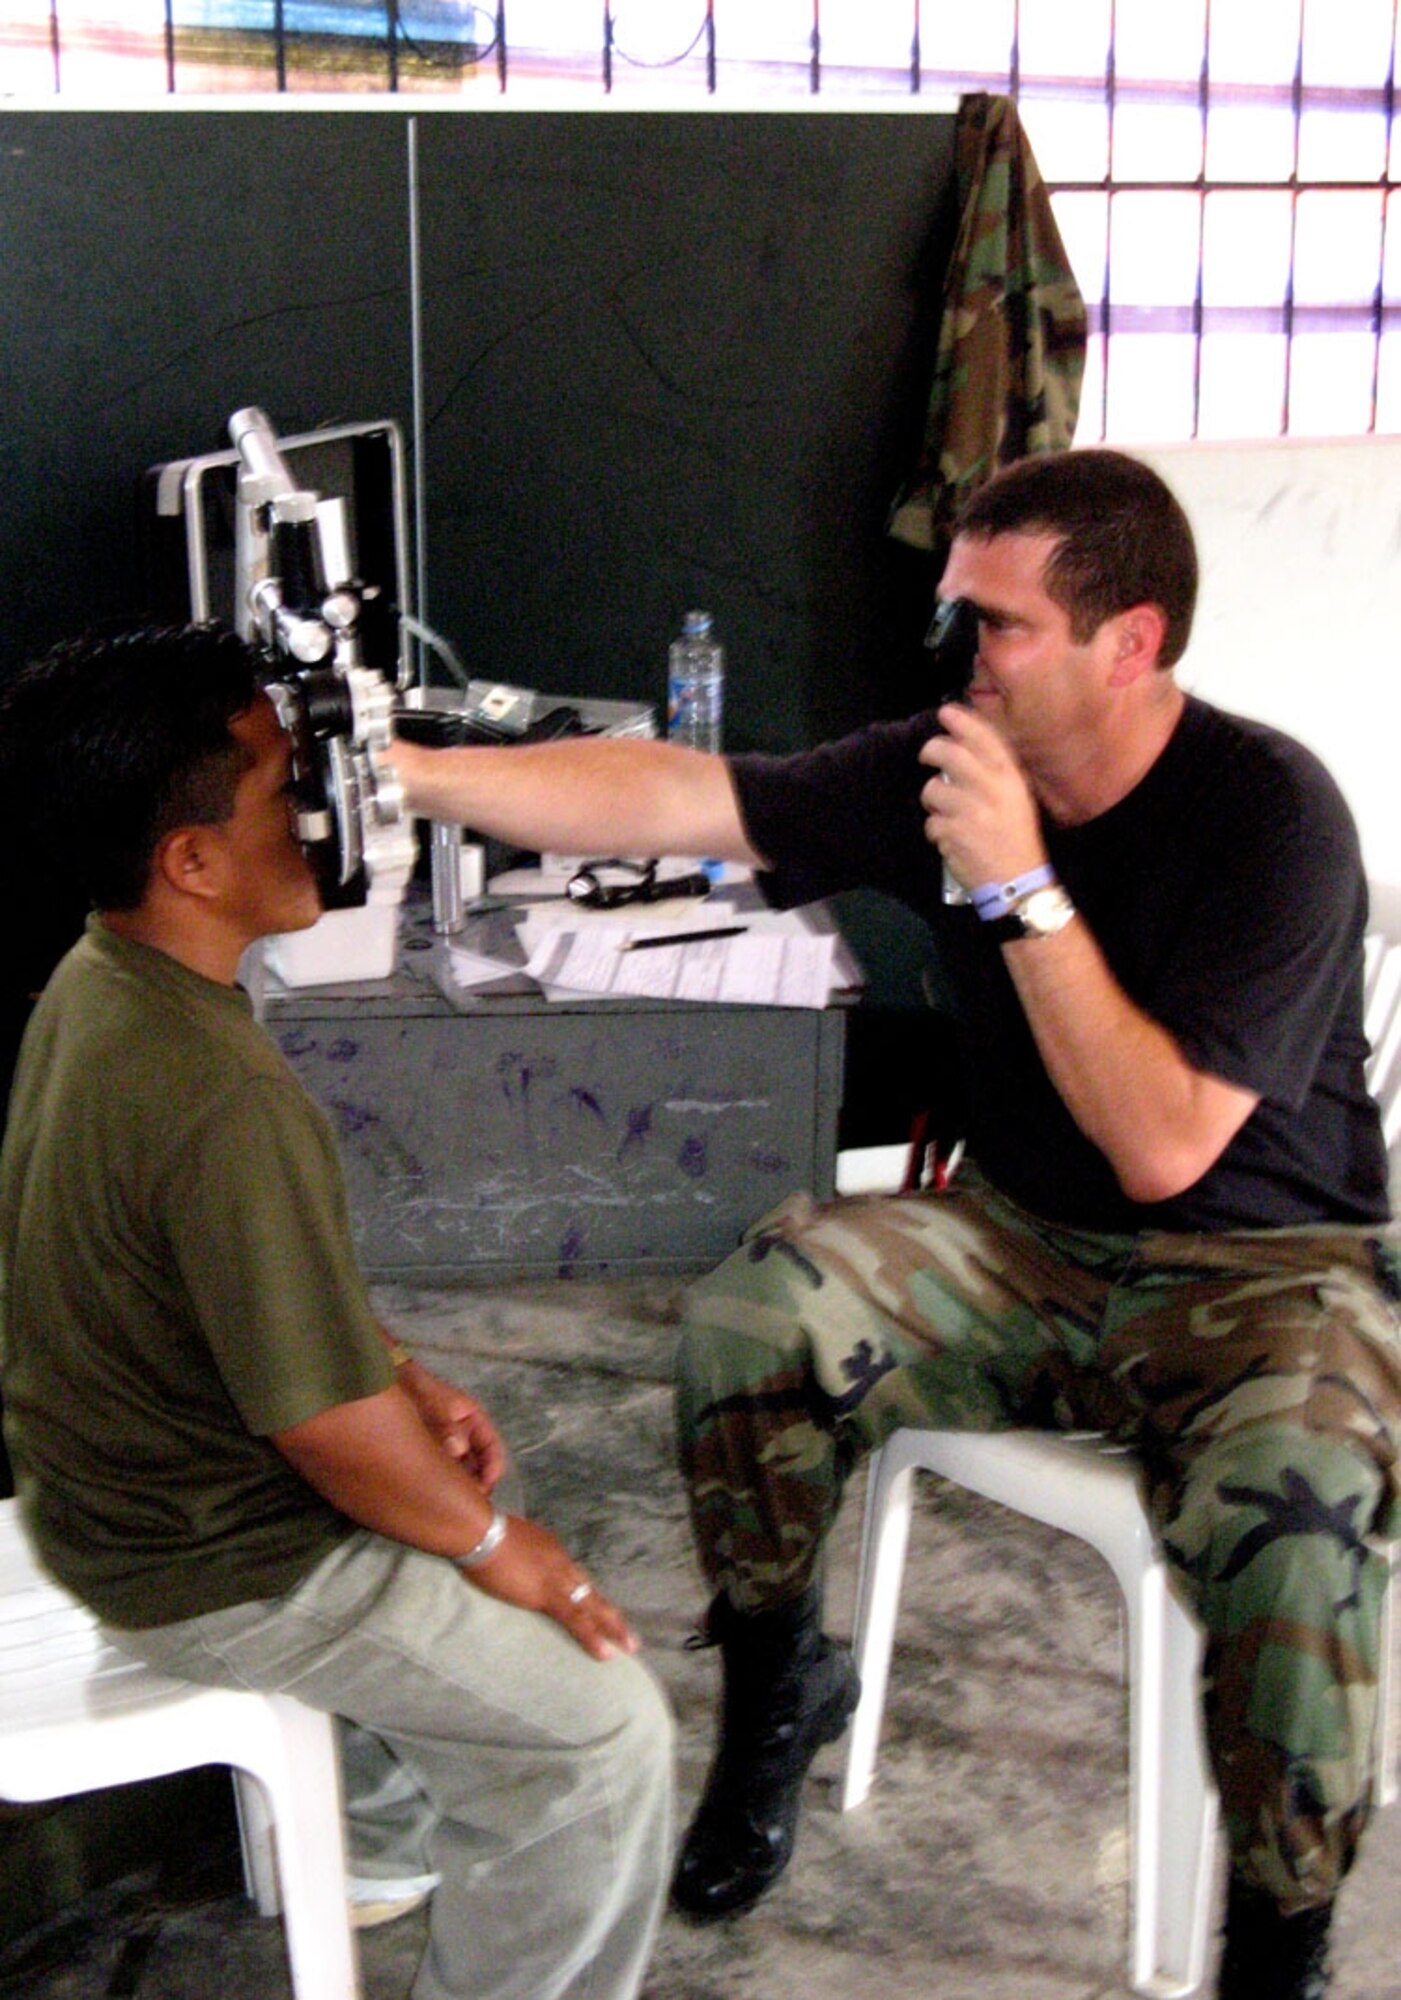 A 49th Medical Group optometrist checks a local Ecuadorian's eyes while deployed to the South American country. Fourteen Airman traveled there for two week on this humanitarian assistance deployment and treated more than 6,800 patients and filled more than 17,500 prescriptions. (U.S. Air Force photo/courtesy of the 49th Medical Group MEDRETE team)